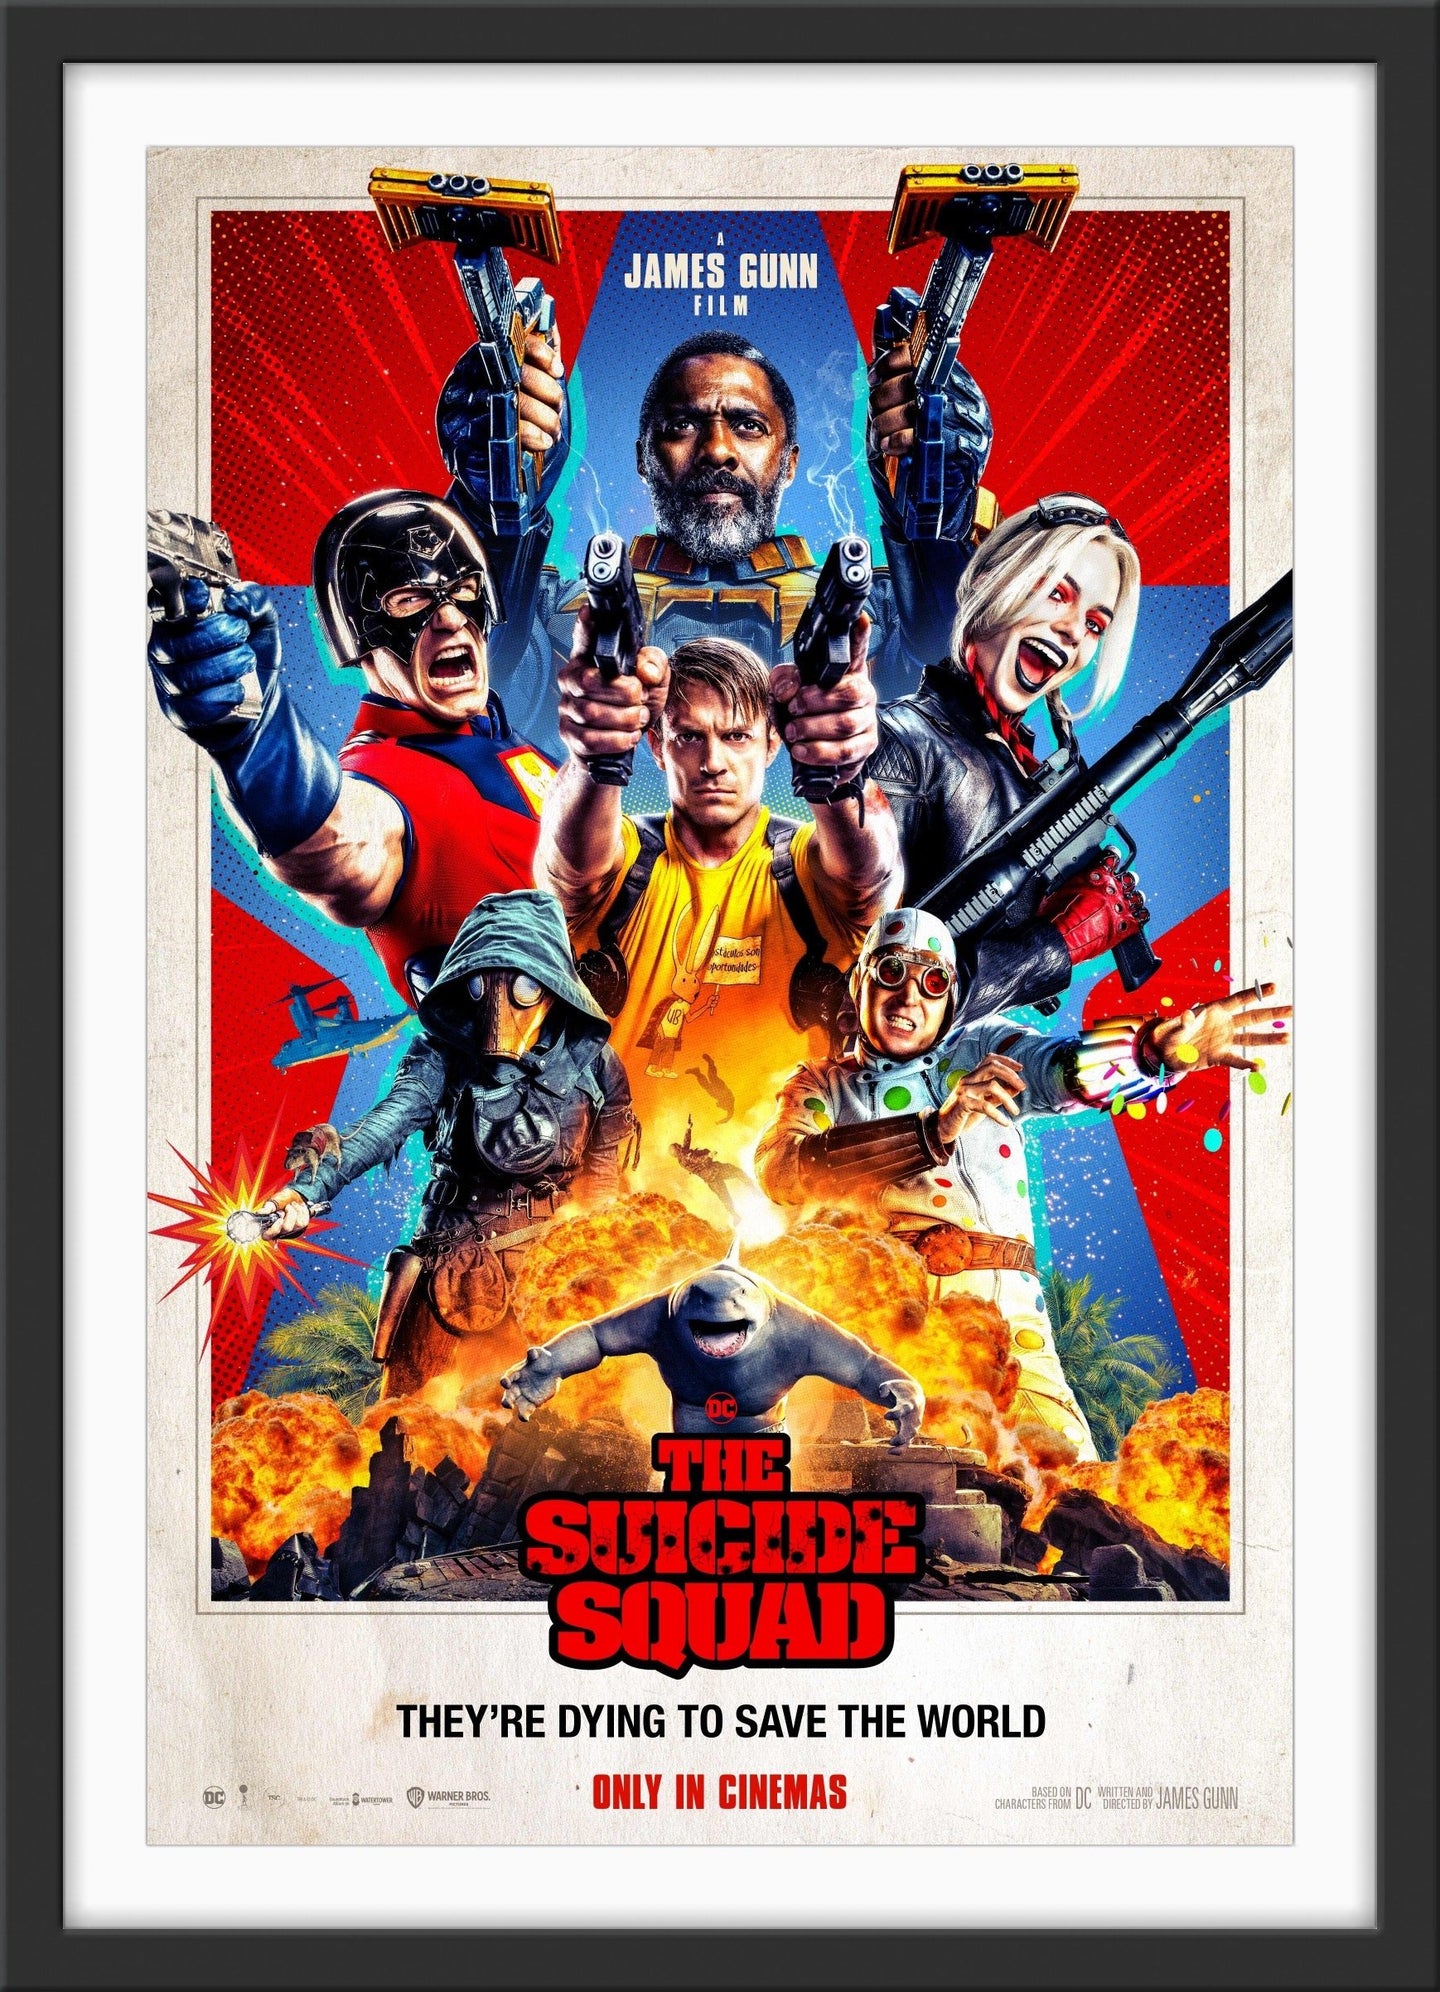 An original movie poster for the James Gunn film The Suicide Squad